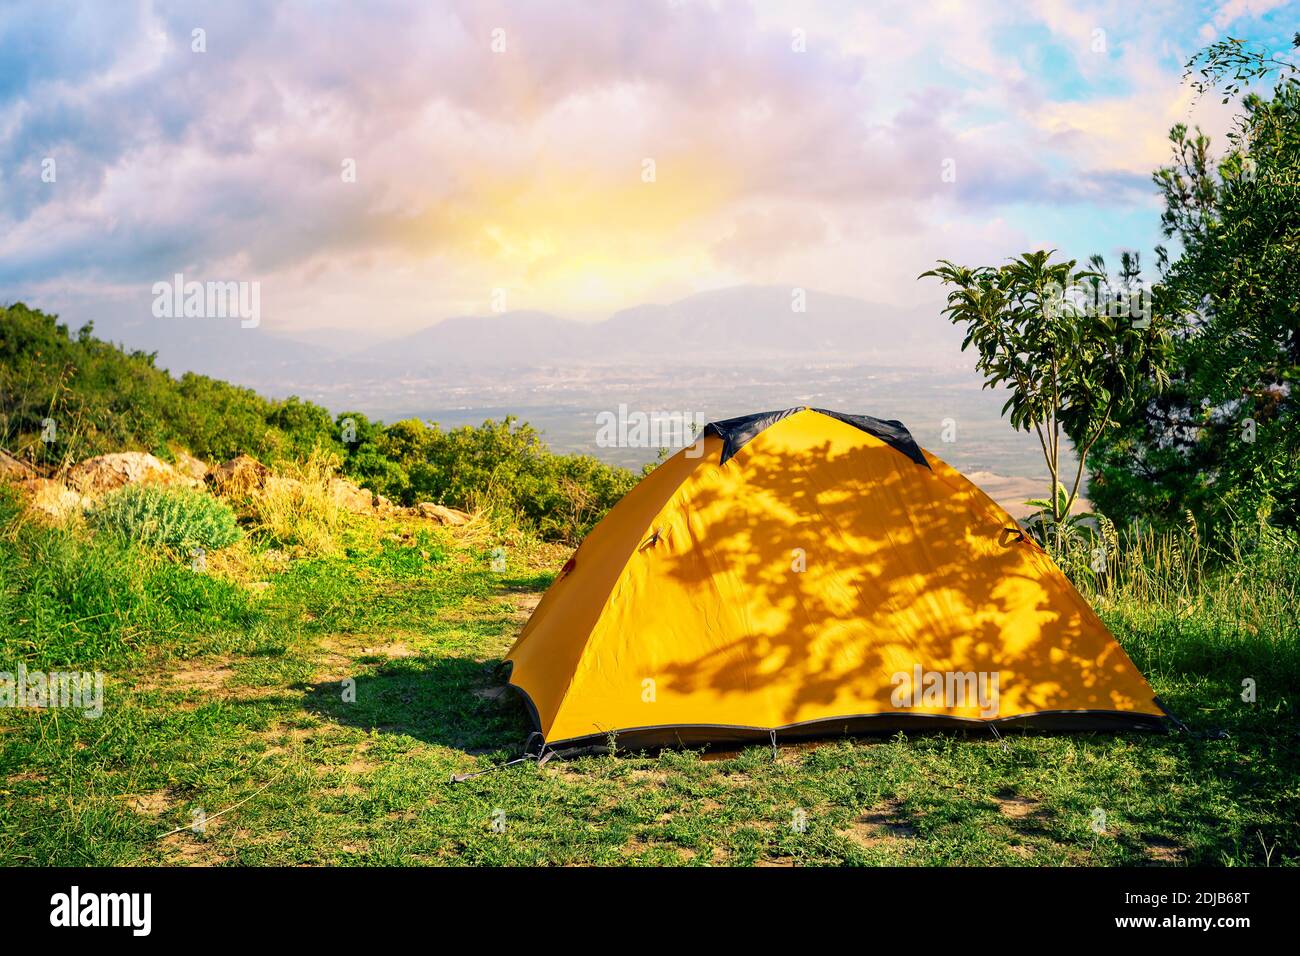 Orange tent on hill with mountains in background at sunrise Stock Photo